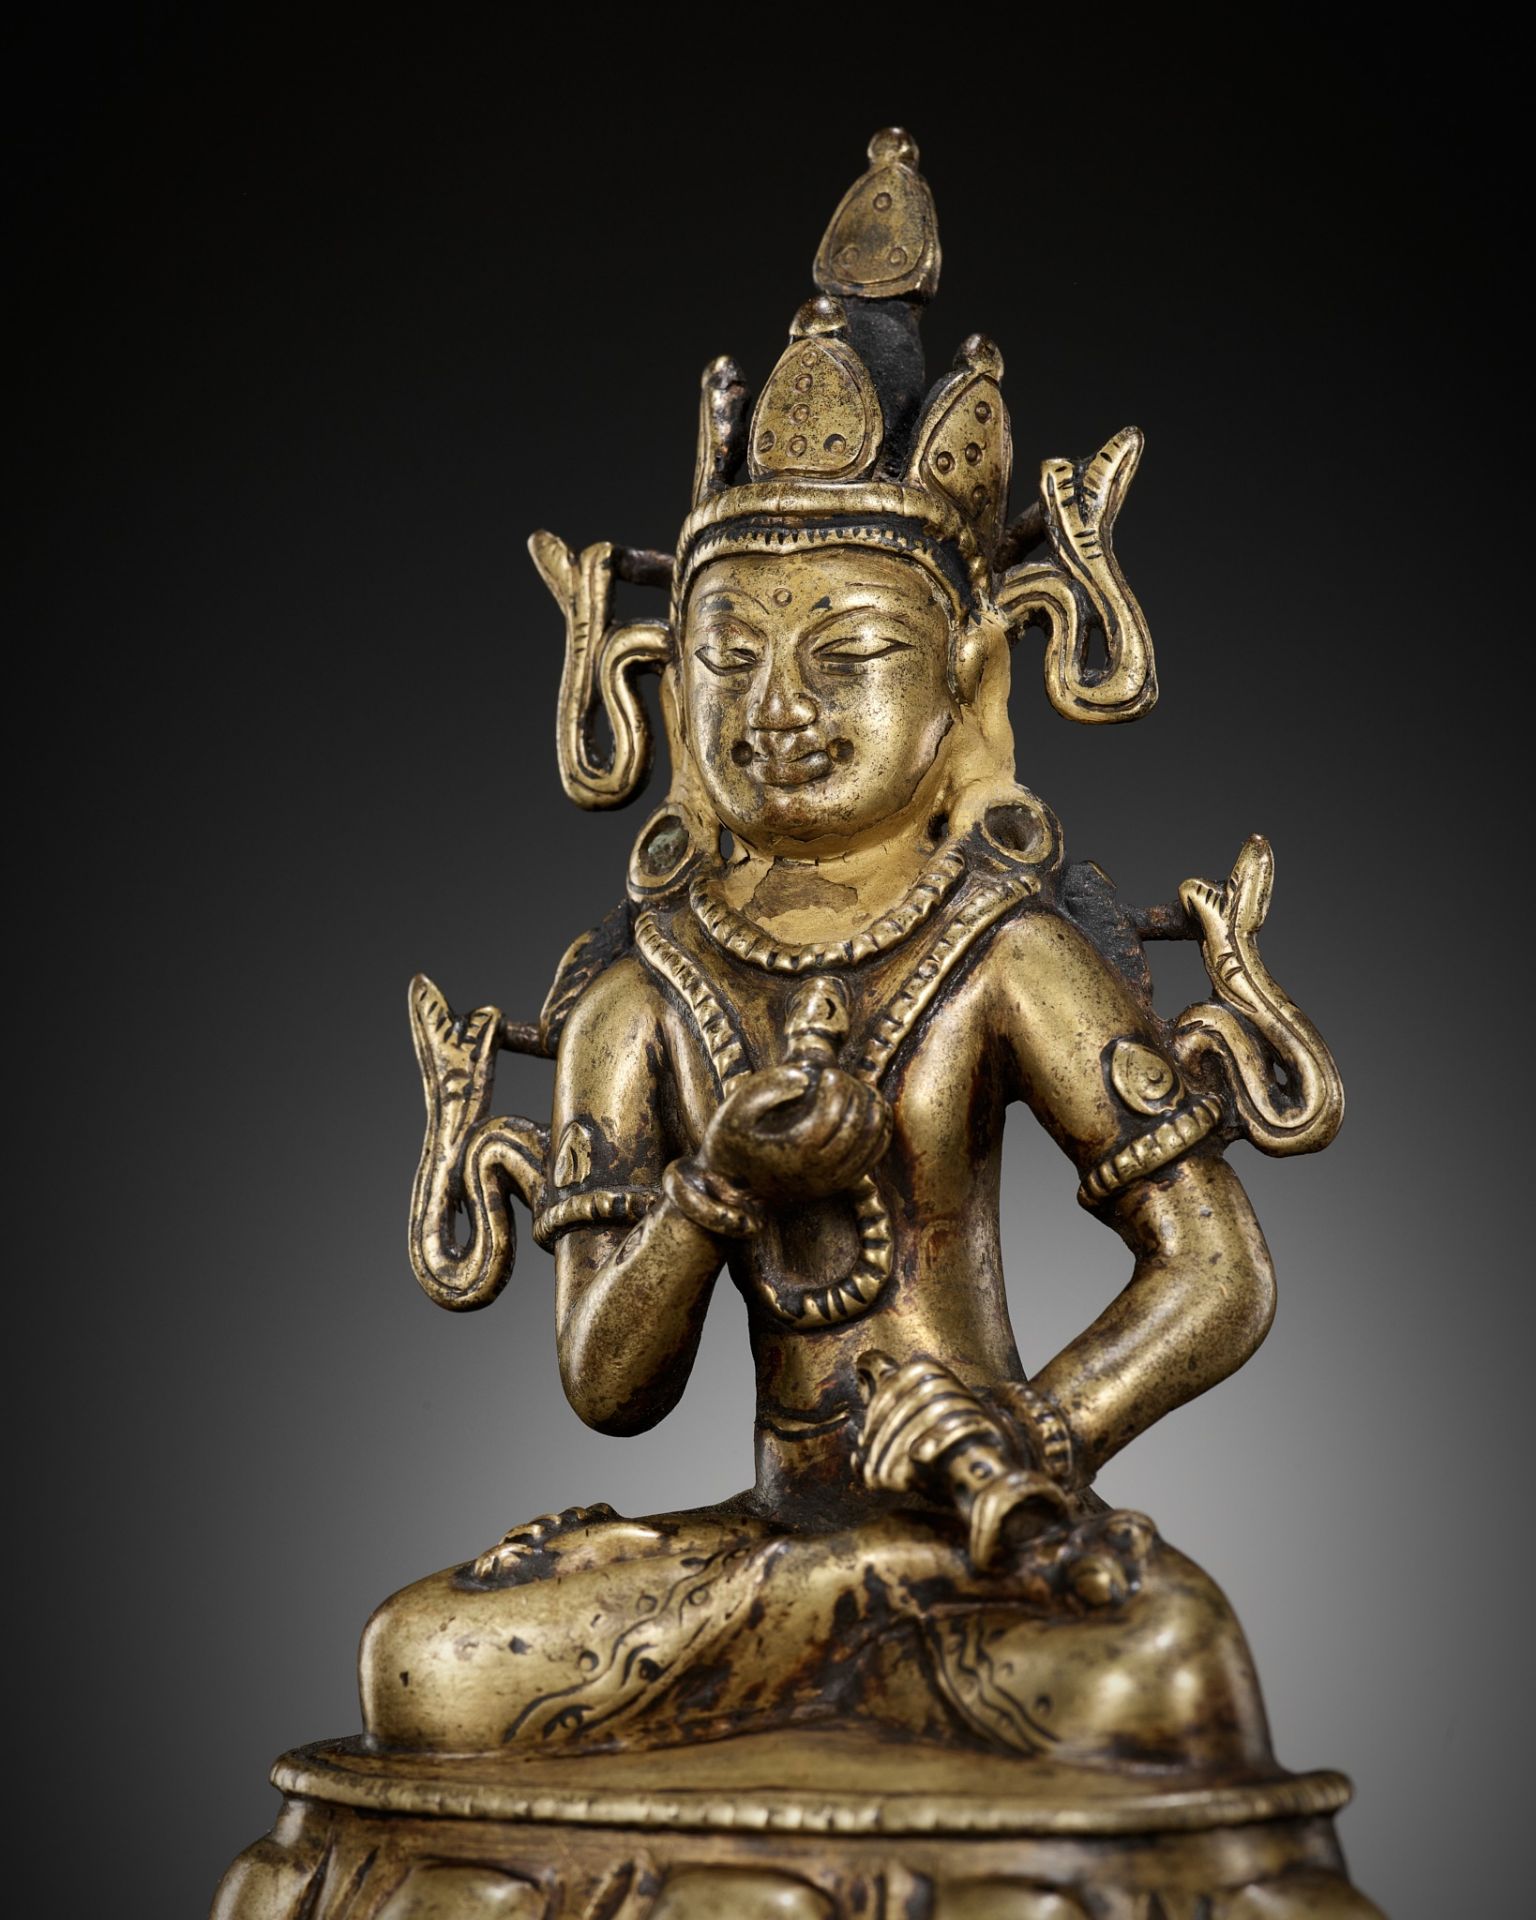 A GILT-BRONZE AND TURQUOISE-INLAID FIGURE OF VAJRASATTVA, KASHMIR STYLE, WEST TIBET, 12TH CENTURY